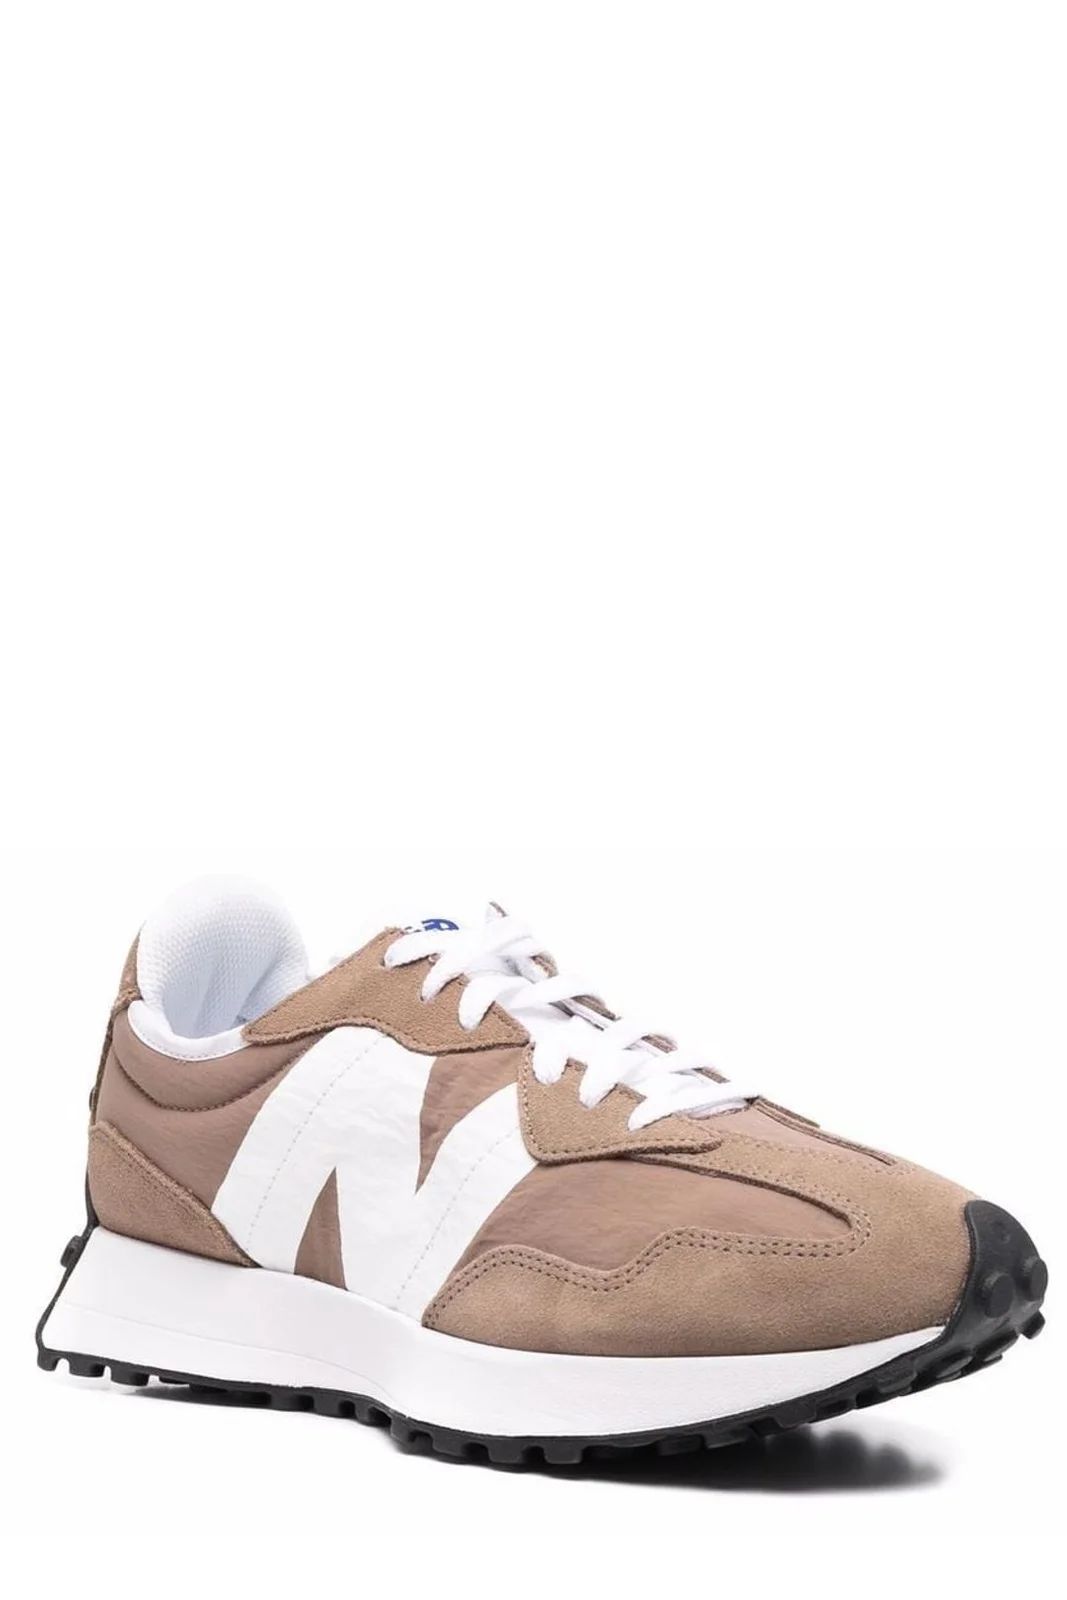 New Balance 327 Lace-Up Sneakers | Cettire Global